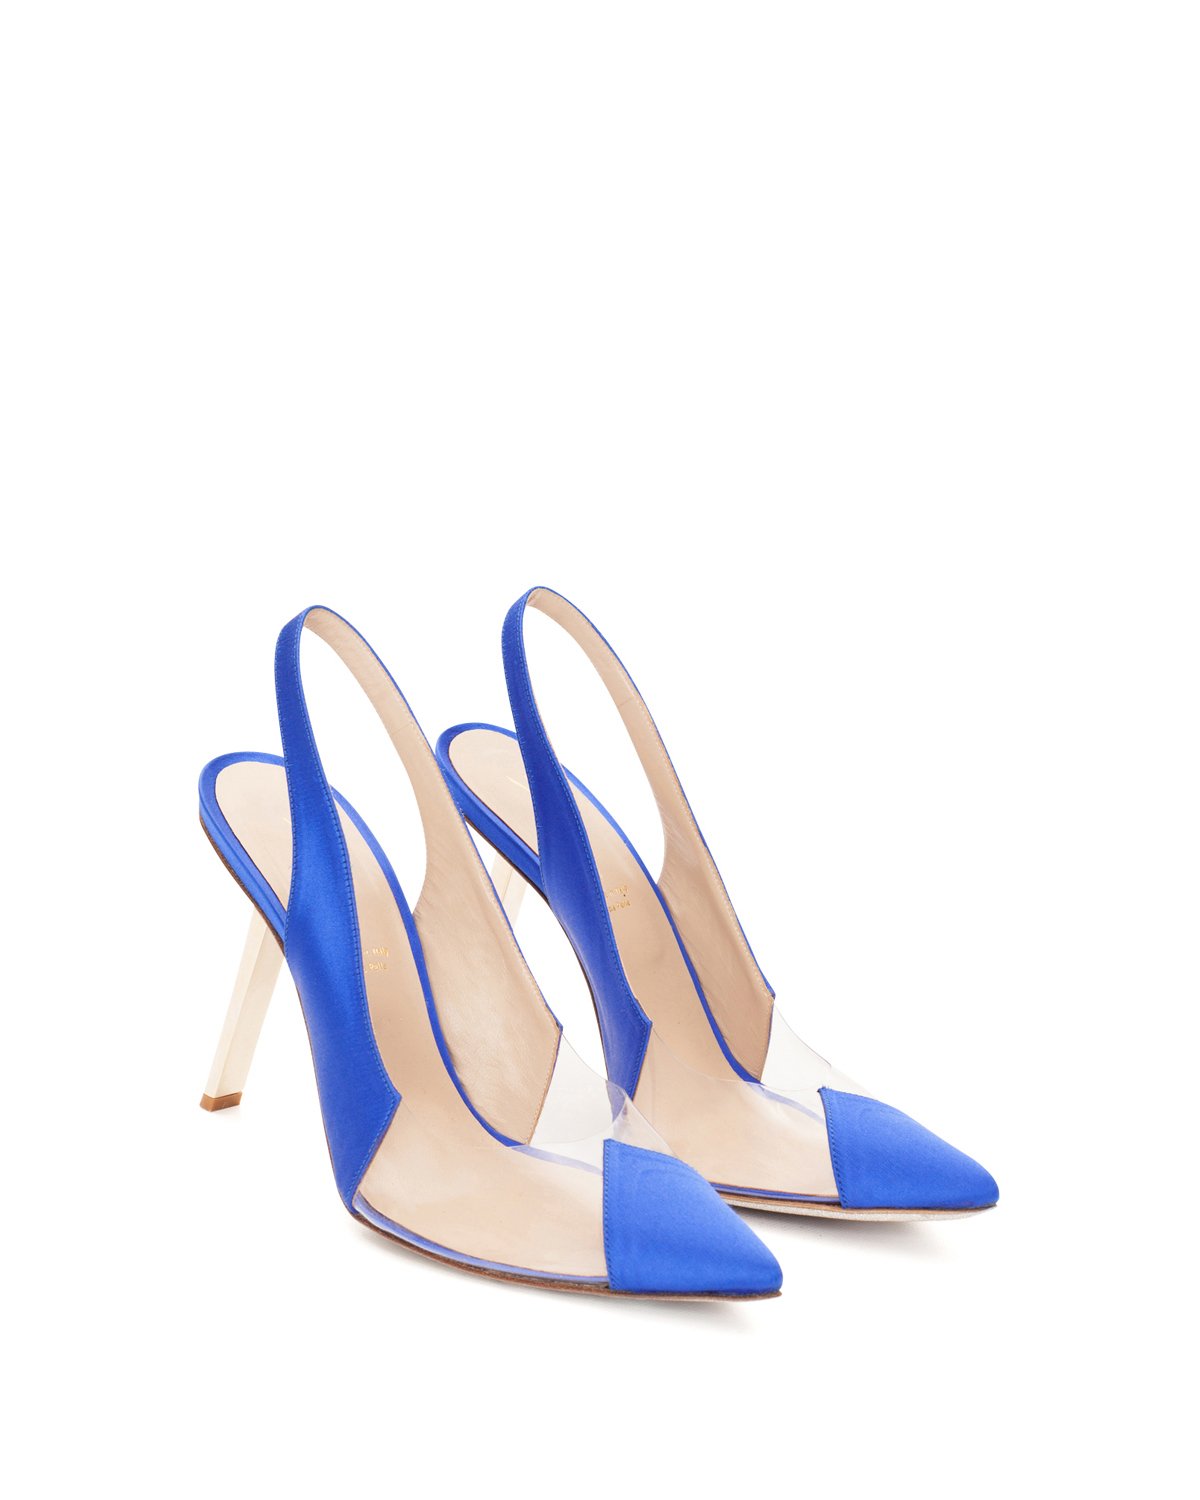 Blue satin pumps with PVC inserts | Sale, -50% | Genny